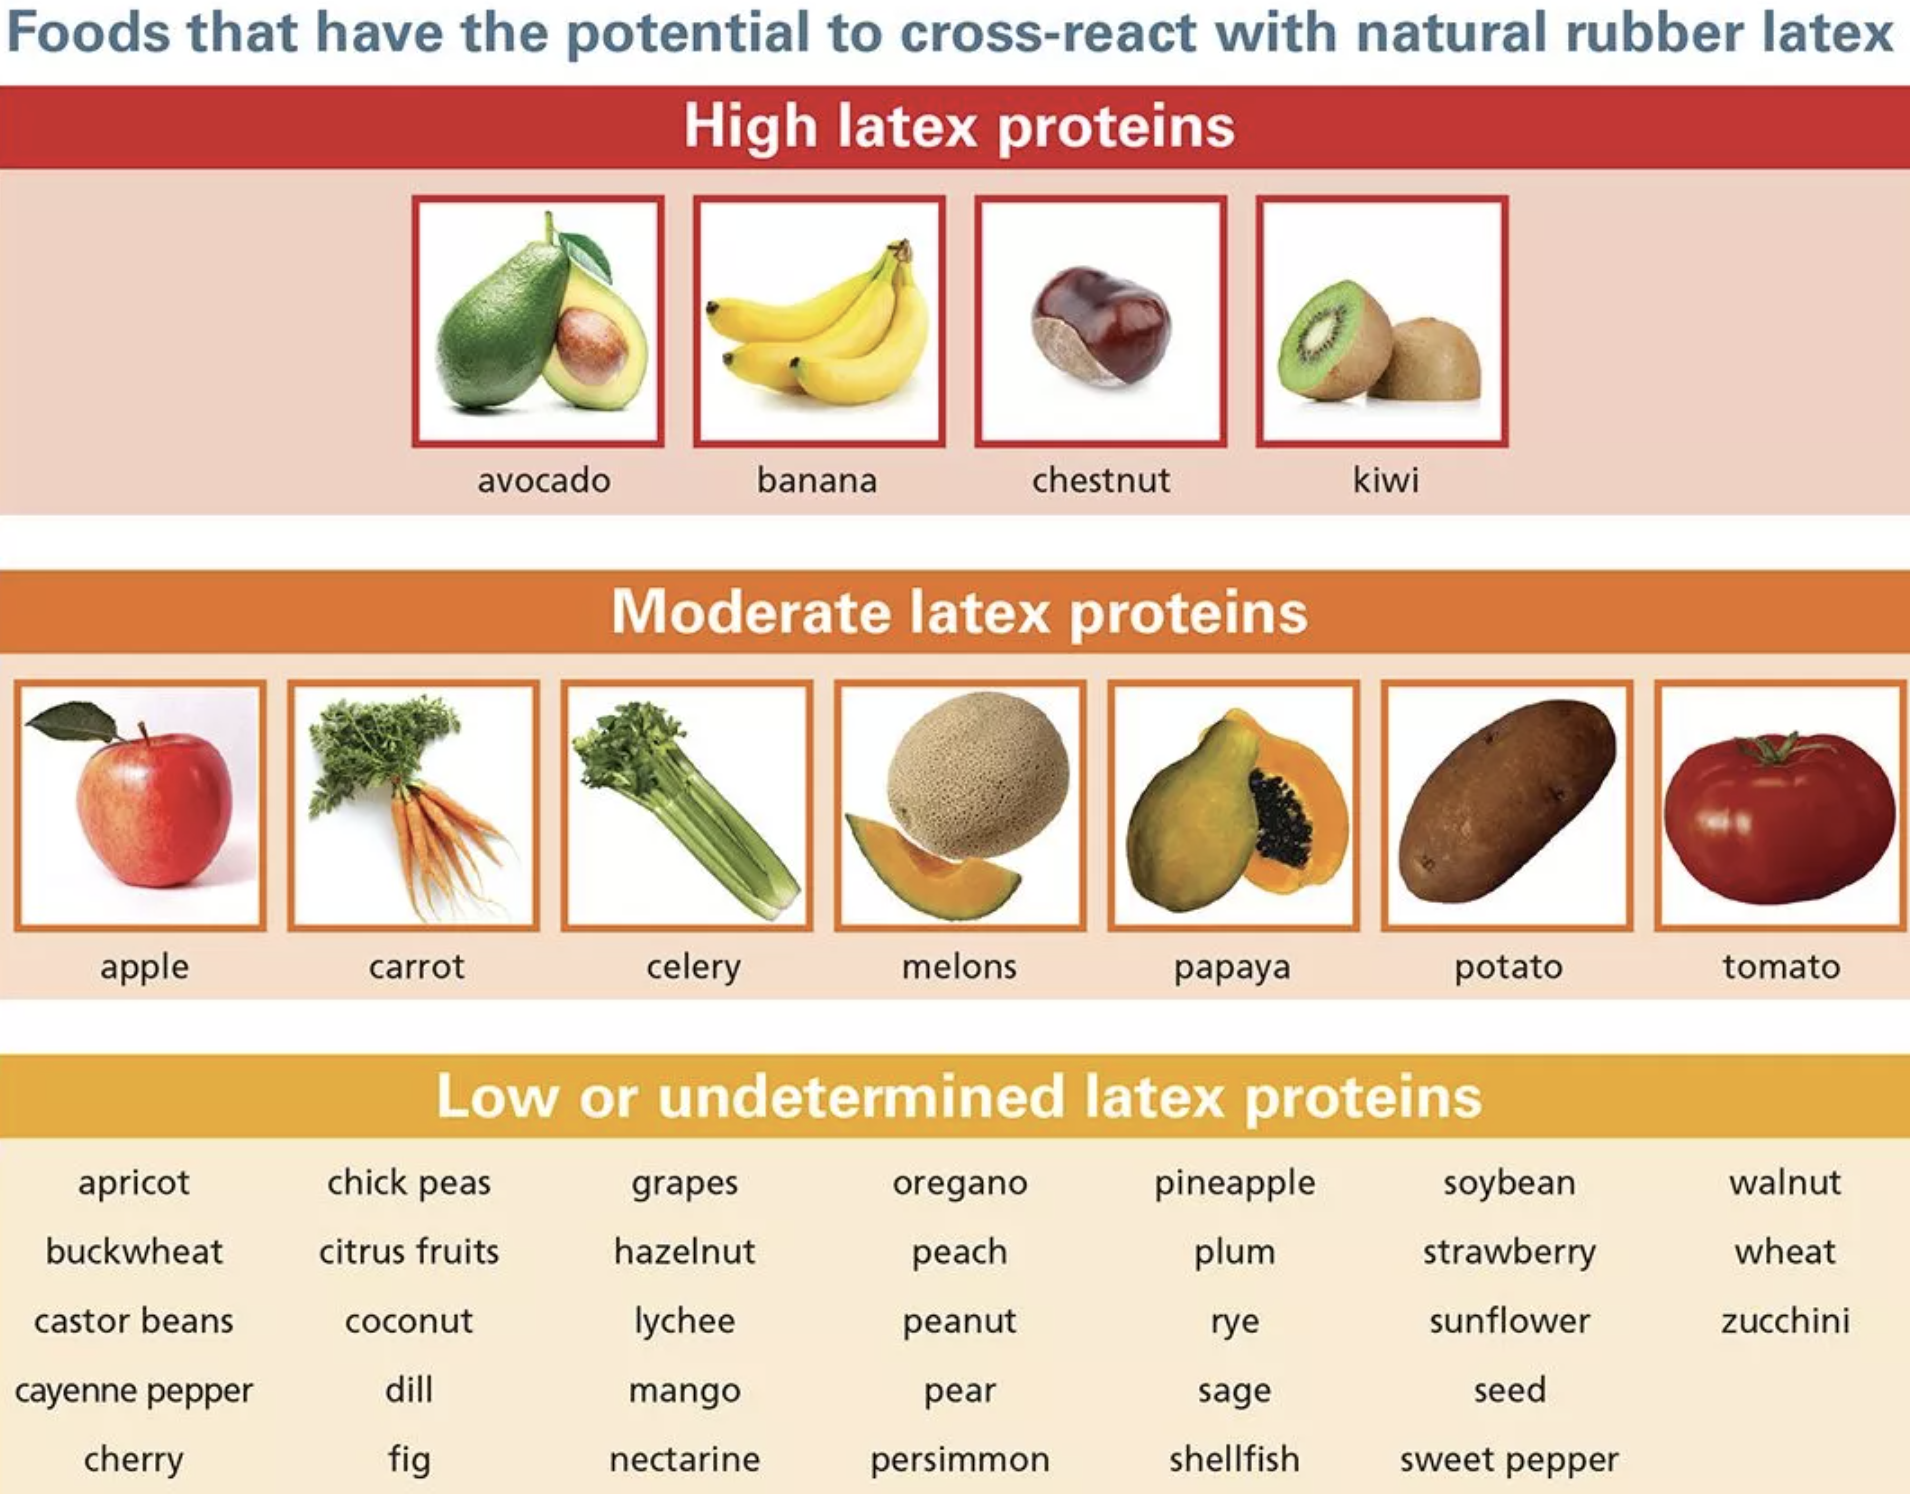 Photo of a chart showing the high, moderate and low food items that can cross react with a natural latex allergy